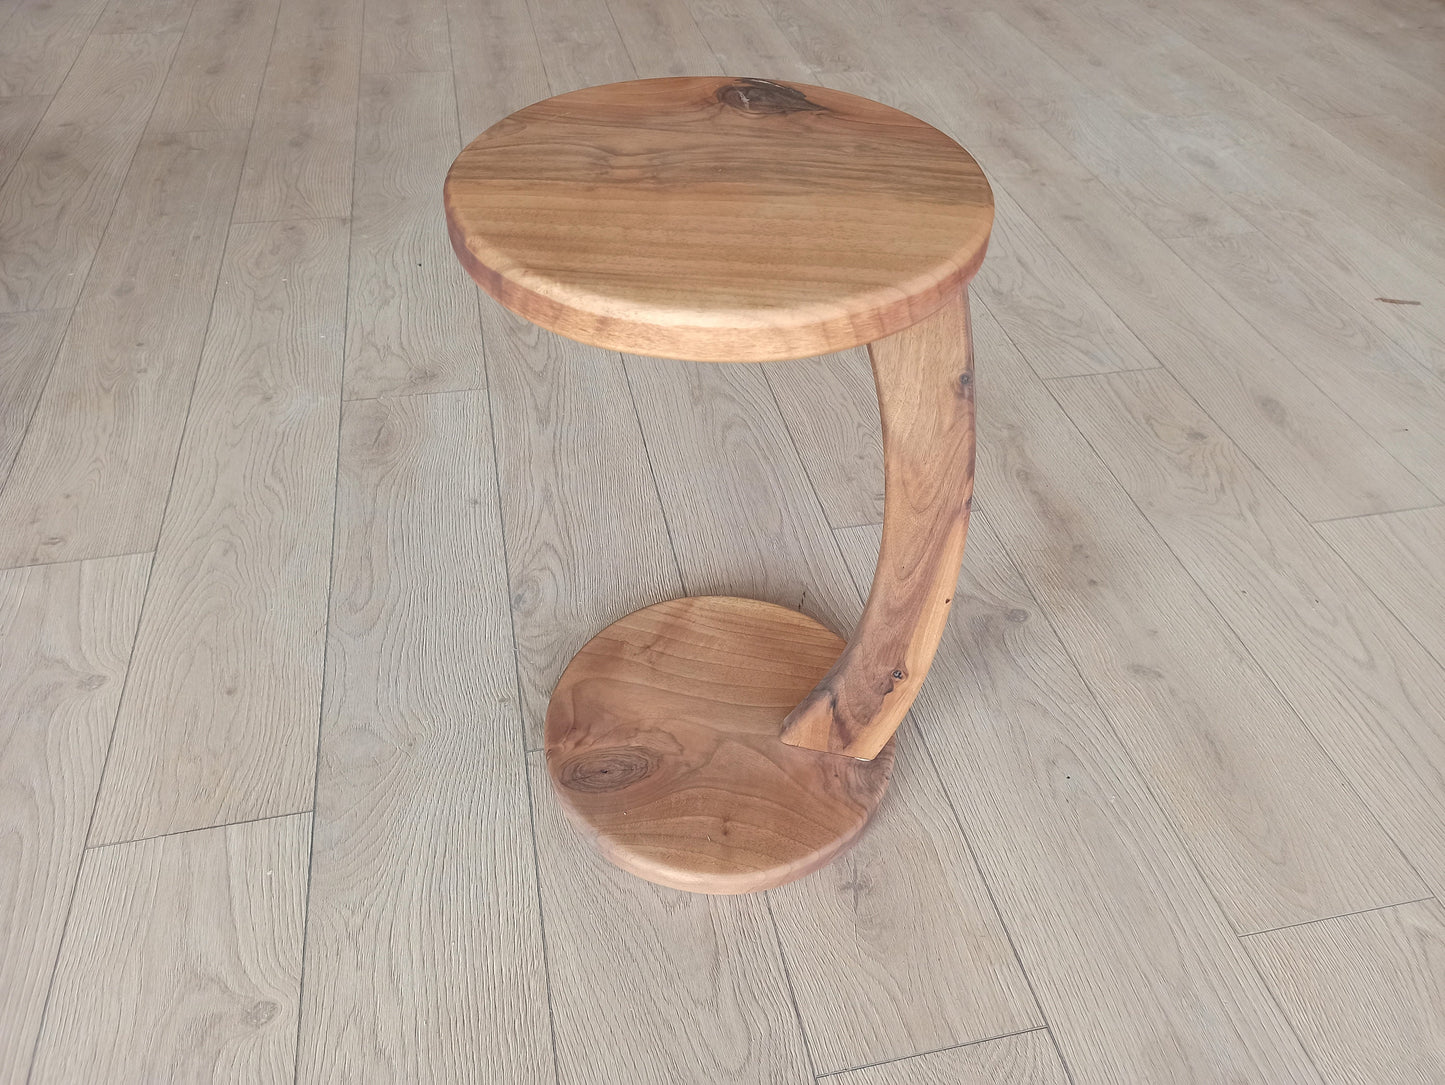 C-Shaped End Table (15.7" x 23.8" inches)(40 cm x 60,5 cm) Laptop Stand, Round Coffee Table, Modern Walnut Side Table for Sofa WodyGody